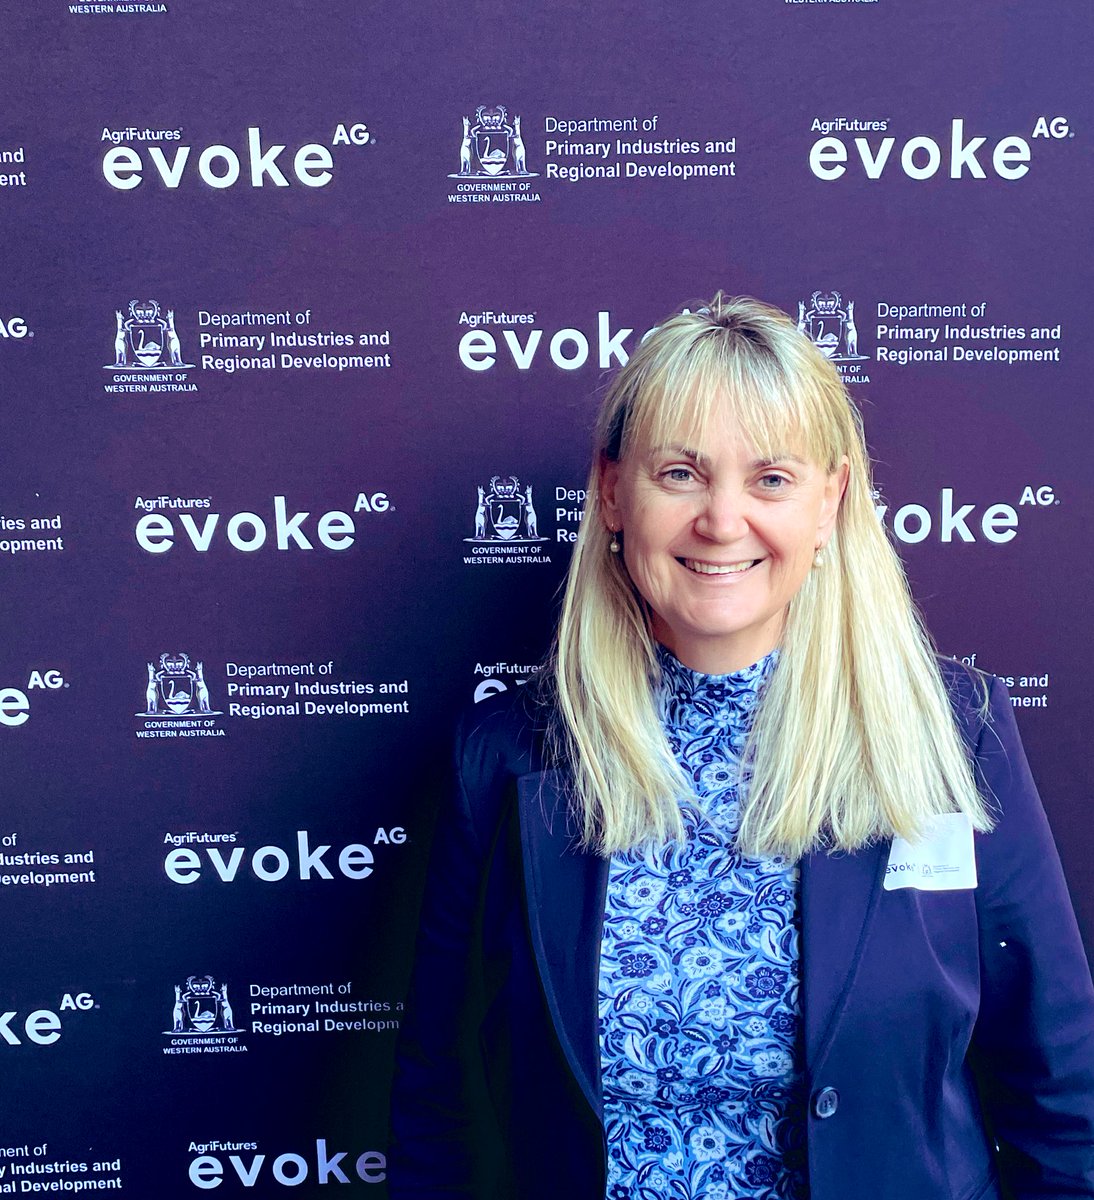 At @evokeAG warm up session today, starting my campaign for genetics /breeding to be on the agenda! Plant breeding has lots of amazing Agtech & it’s time to showcase how genetics is part of the solution for sustainability and feeding the world @InterGrain1 @AusCropBreeders